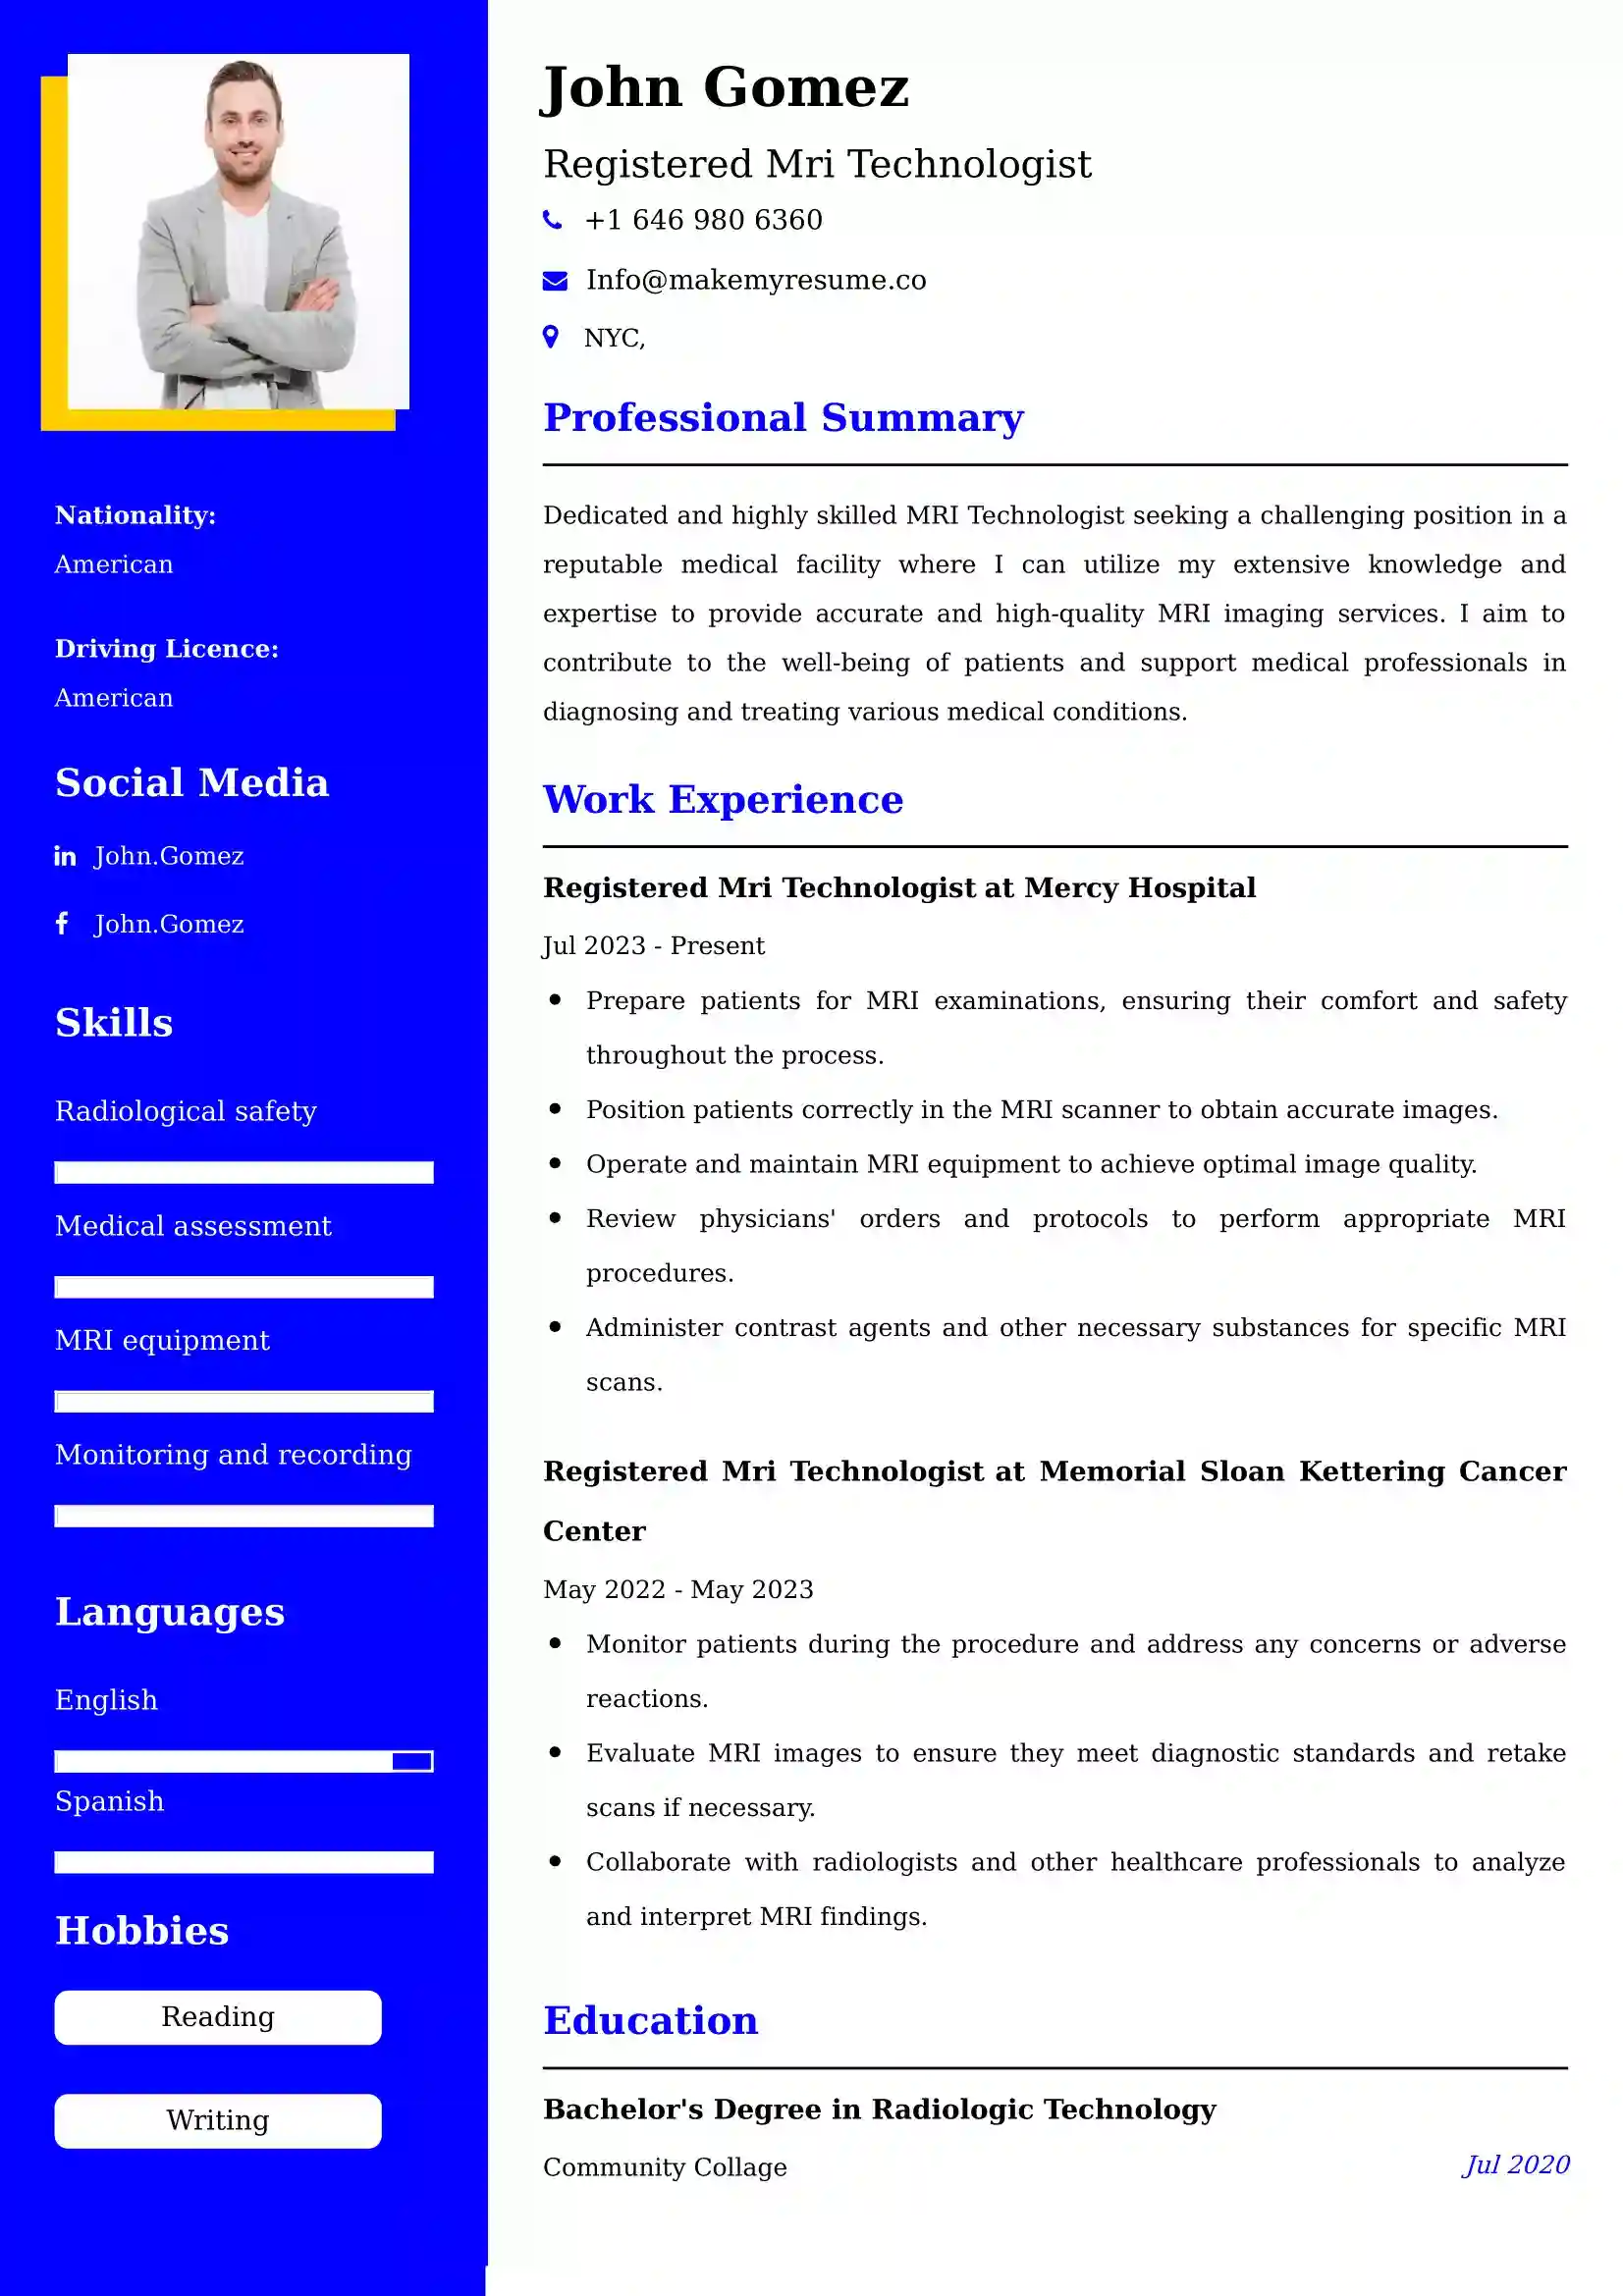 Registered Mri Technologist Resume Examples - UAE Format and Tips.